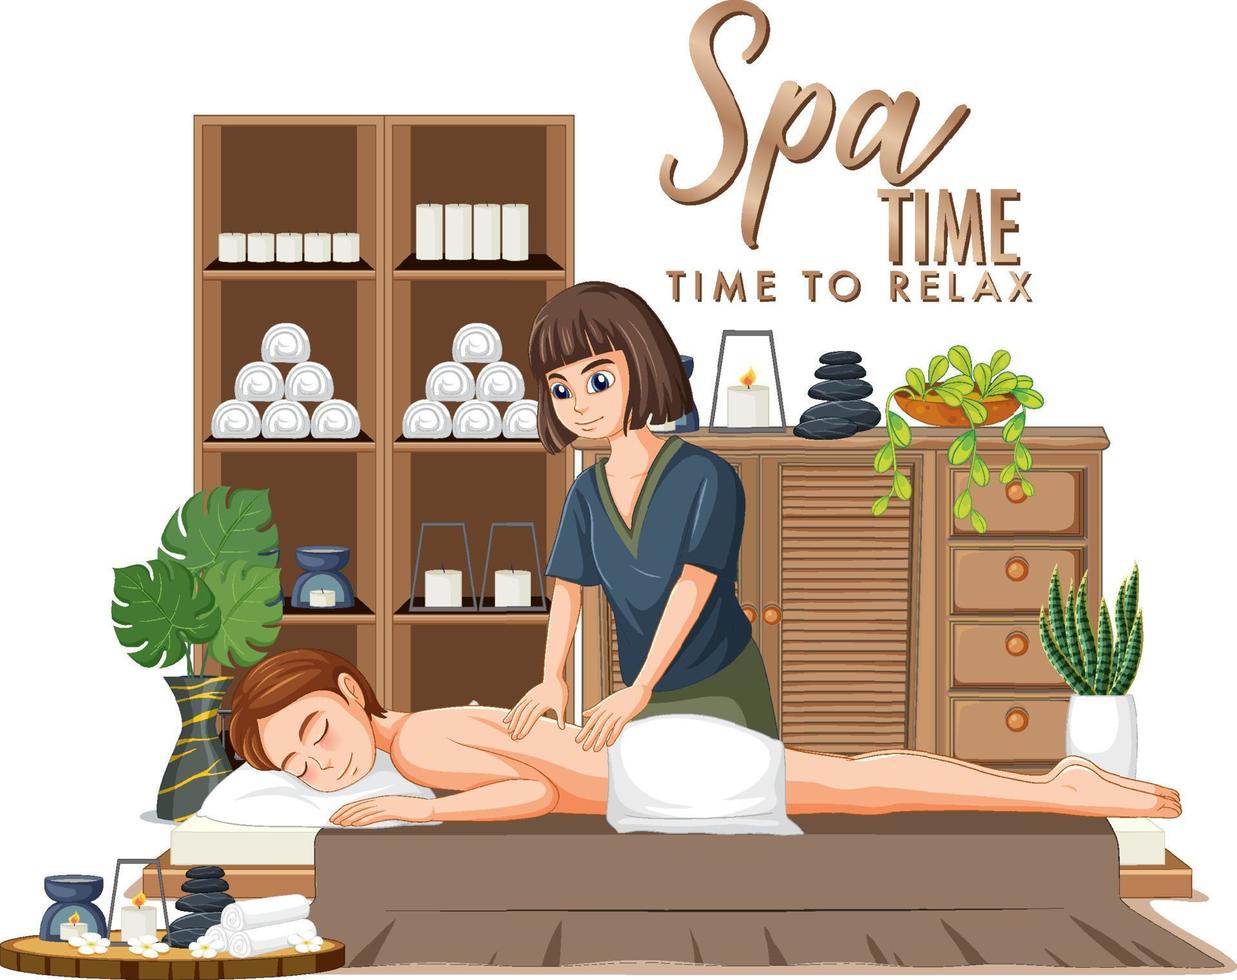 Spa time text design for banner or poster vector